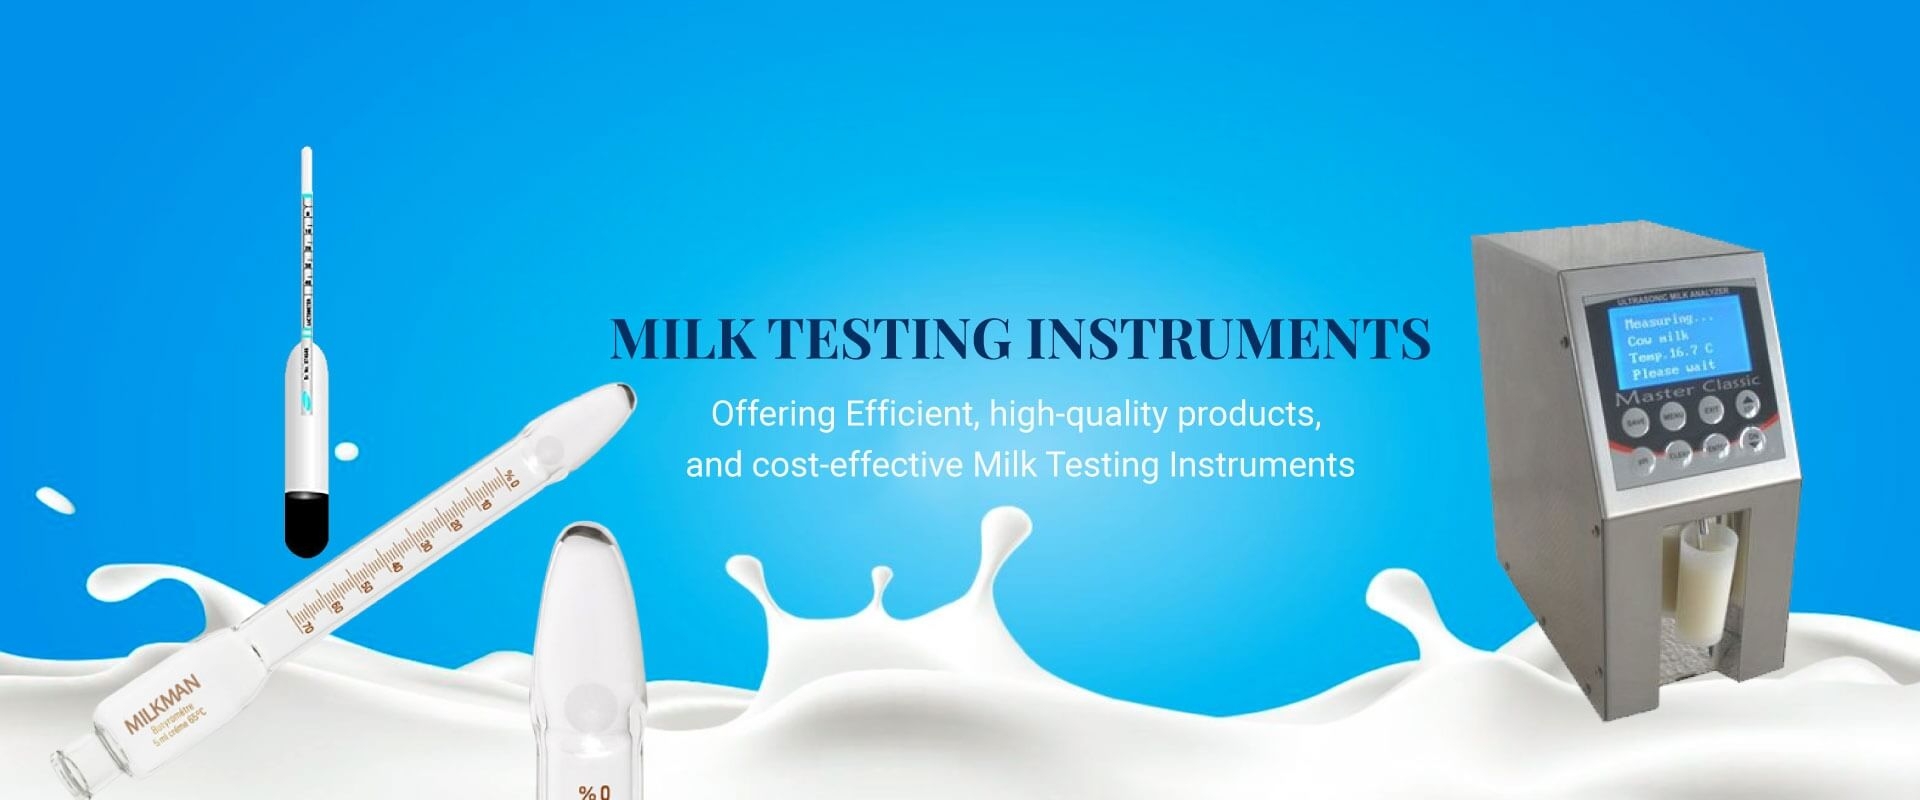 Milk Testing Instruments in South Africa